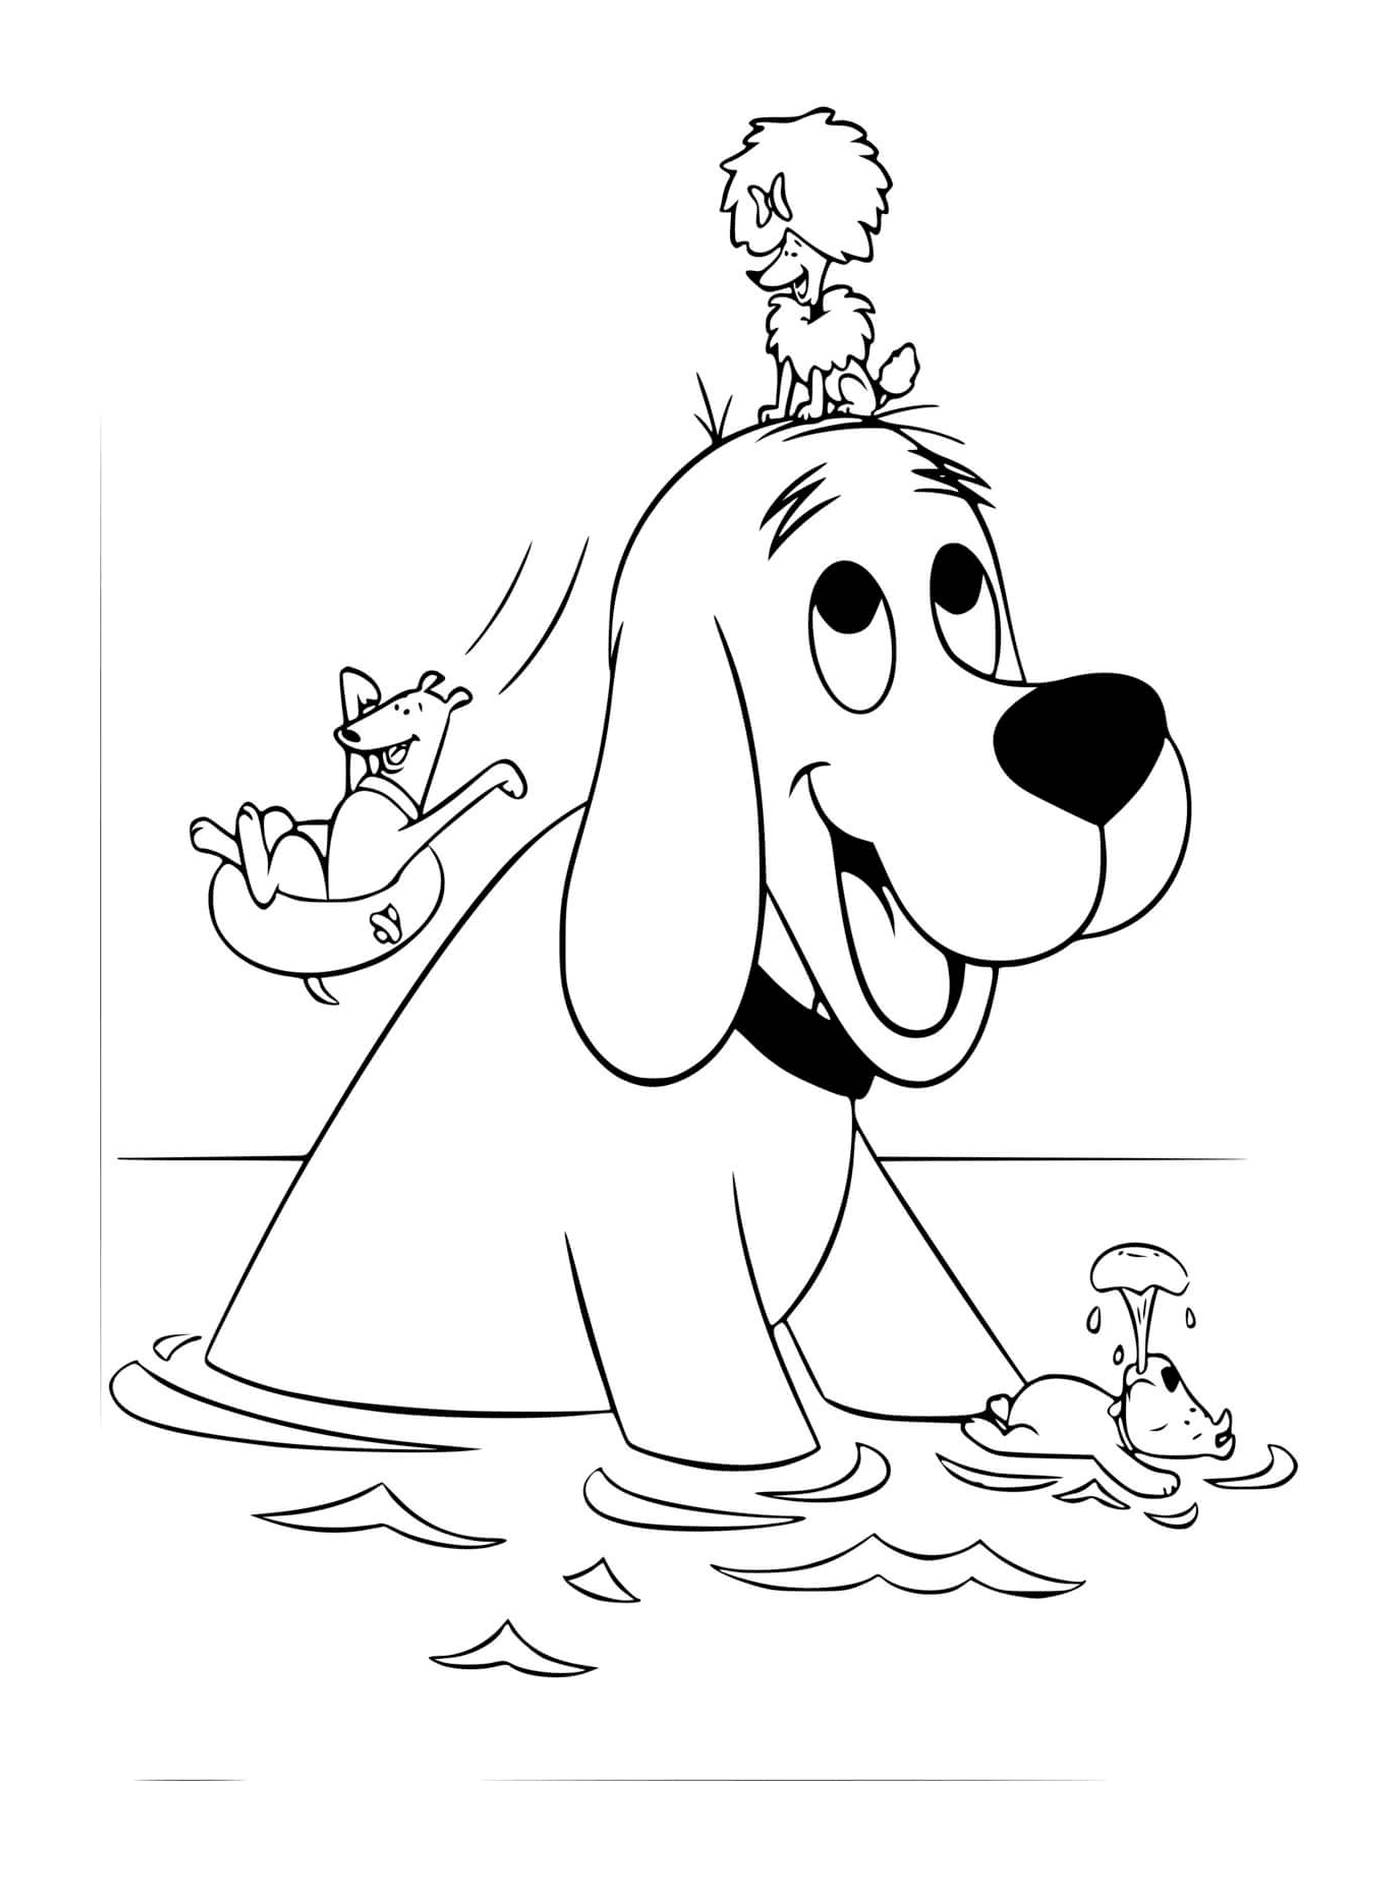  Clifford and his dog friends bathe at the lake 